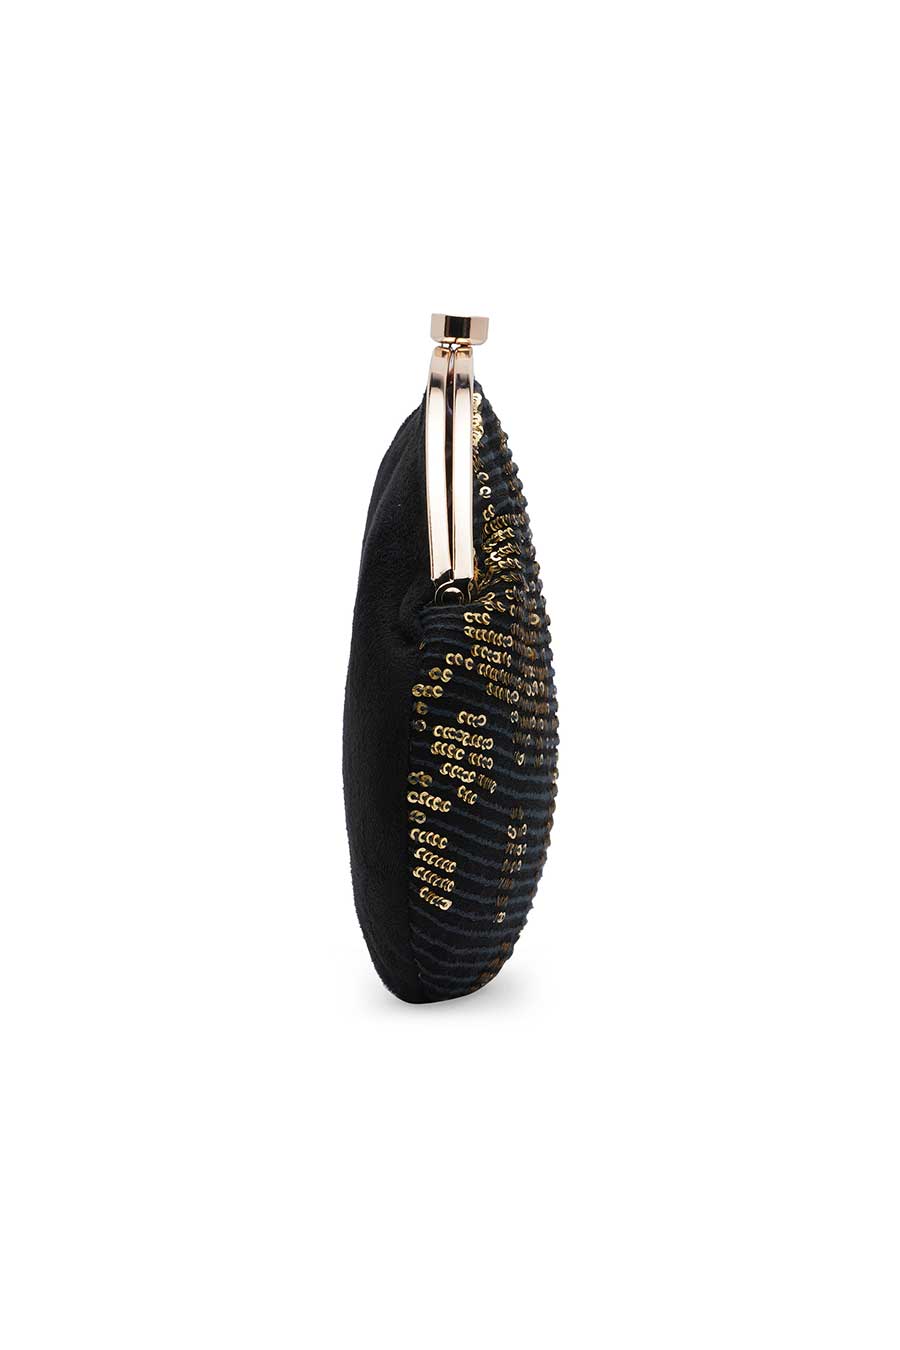 Gold Sequin Pouch Style Black Clutch